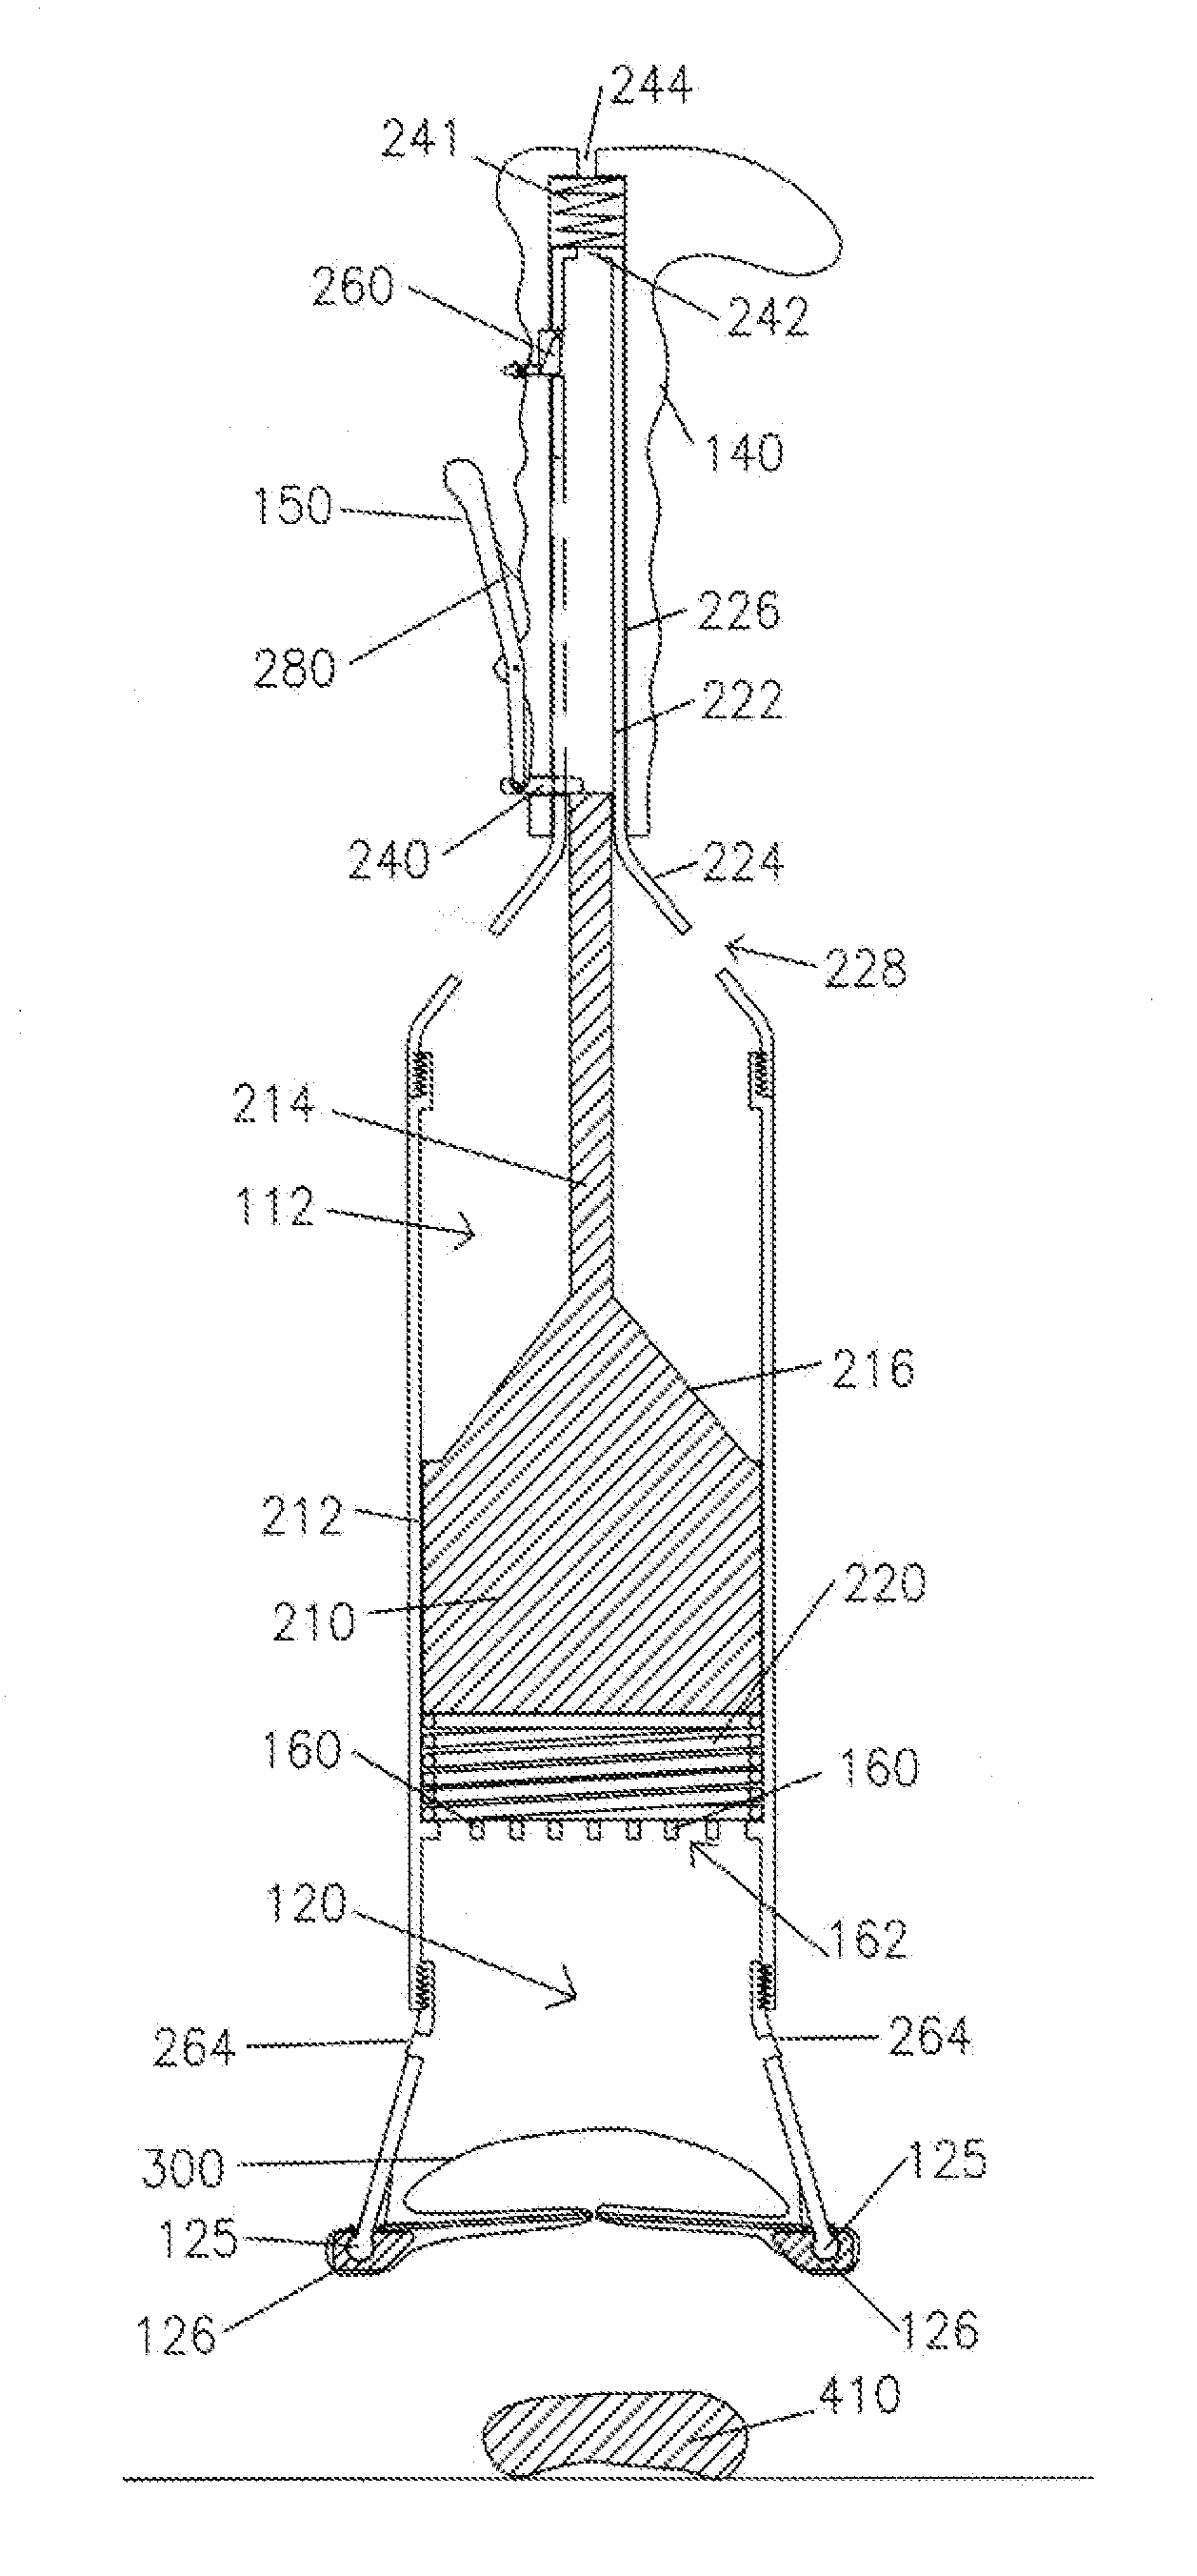 Pet waste and refuse collection system and method